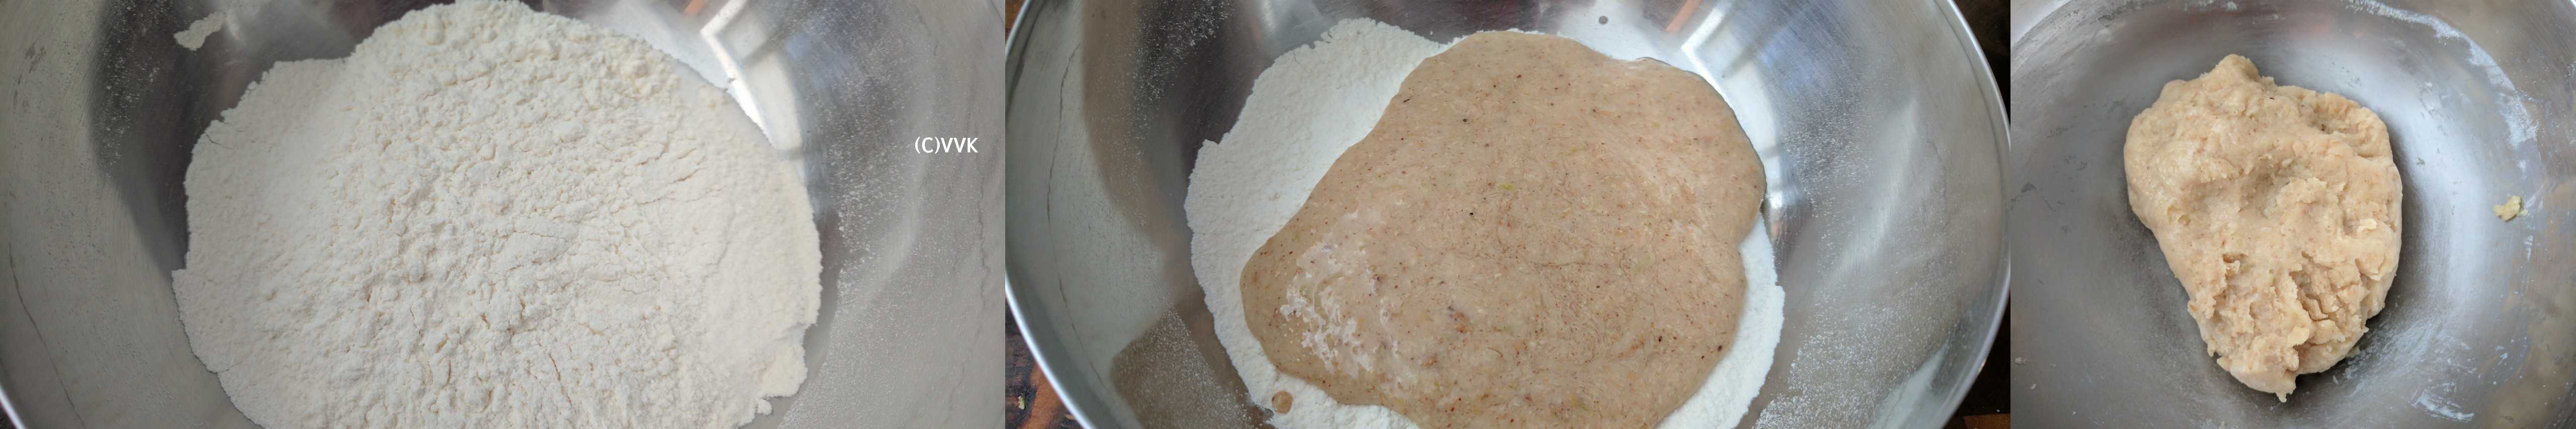 Combining the dry ingredients and wet ingredients